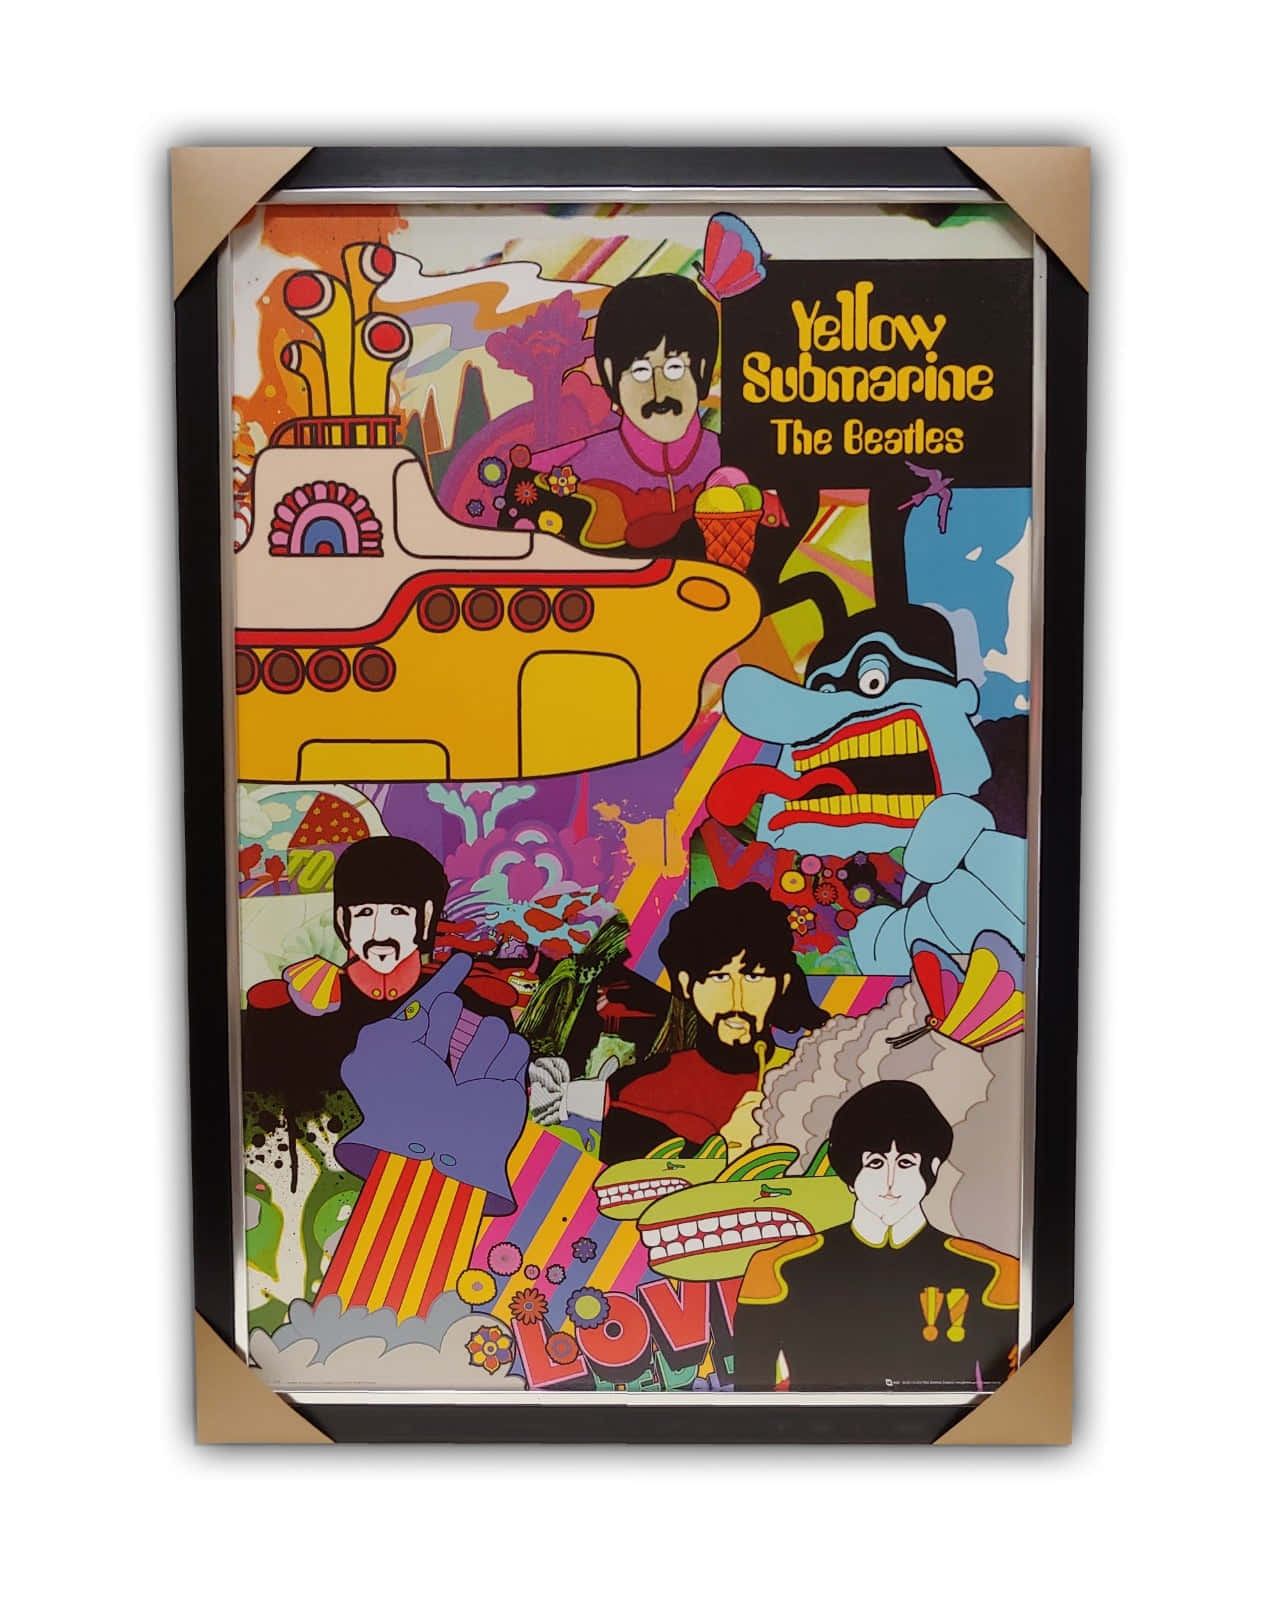 Illustration of a vibrant yellow submarine evoking The Beatles iconic song Wallpaper